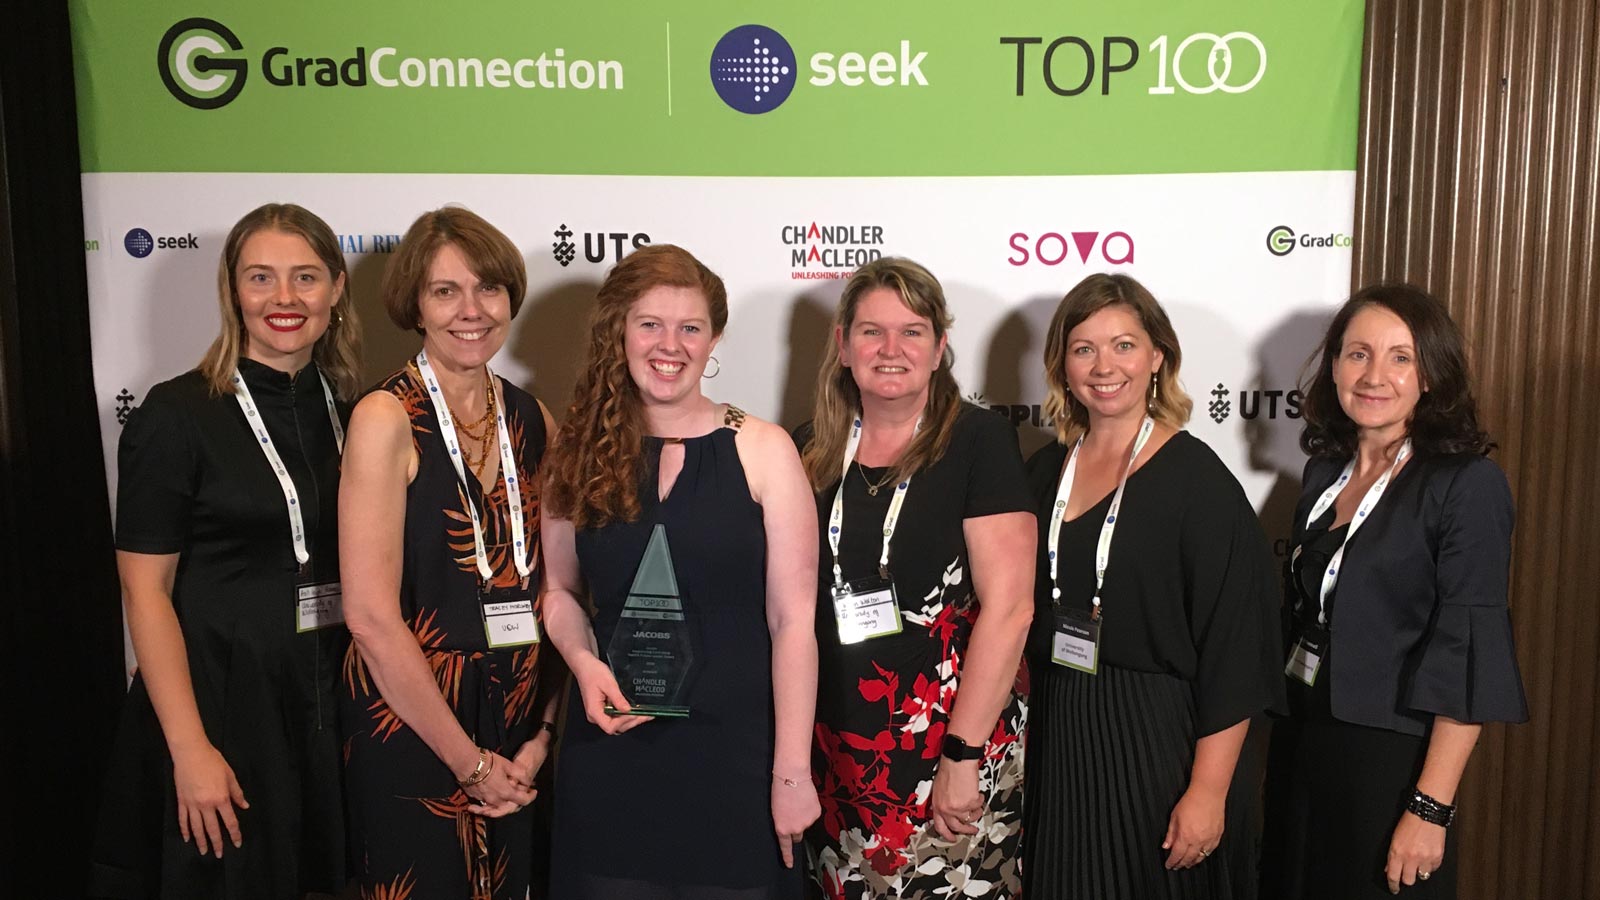 Meg Cummins, third from left, with representatives from UOW at the GradConnection Top 100 Future Leaders Awards. Photo: Supplied